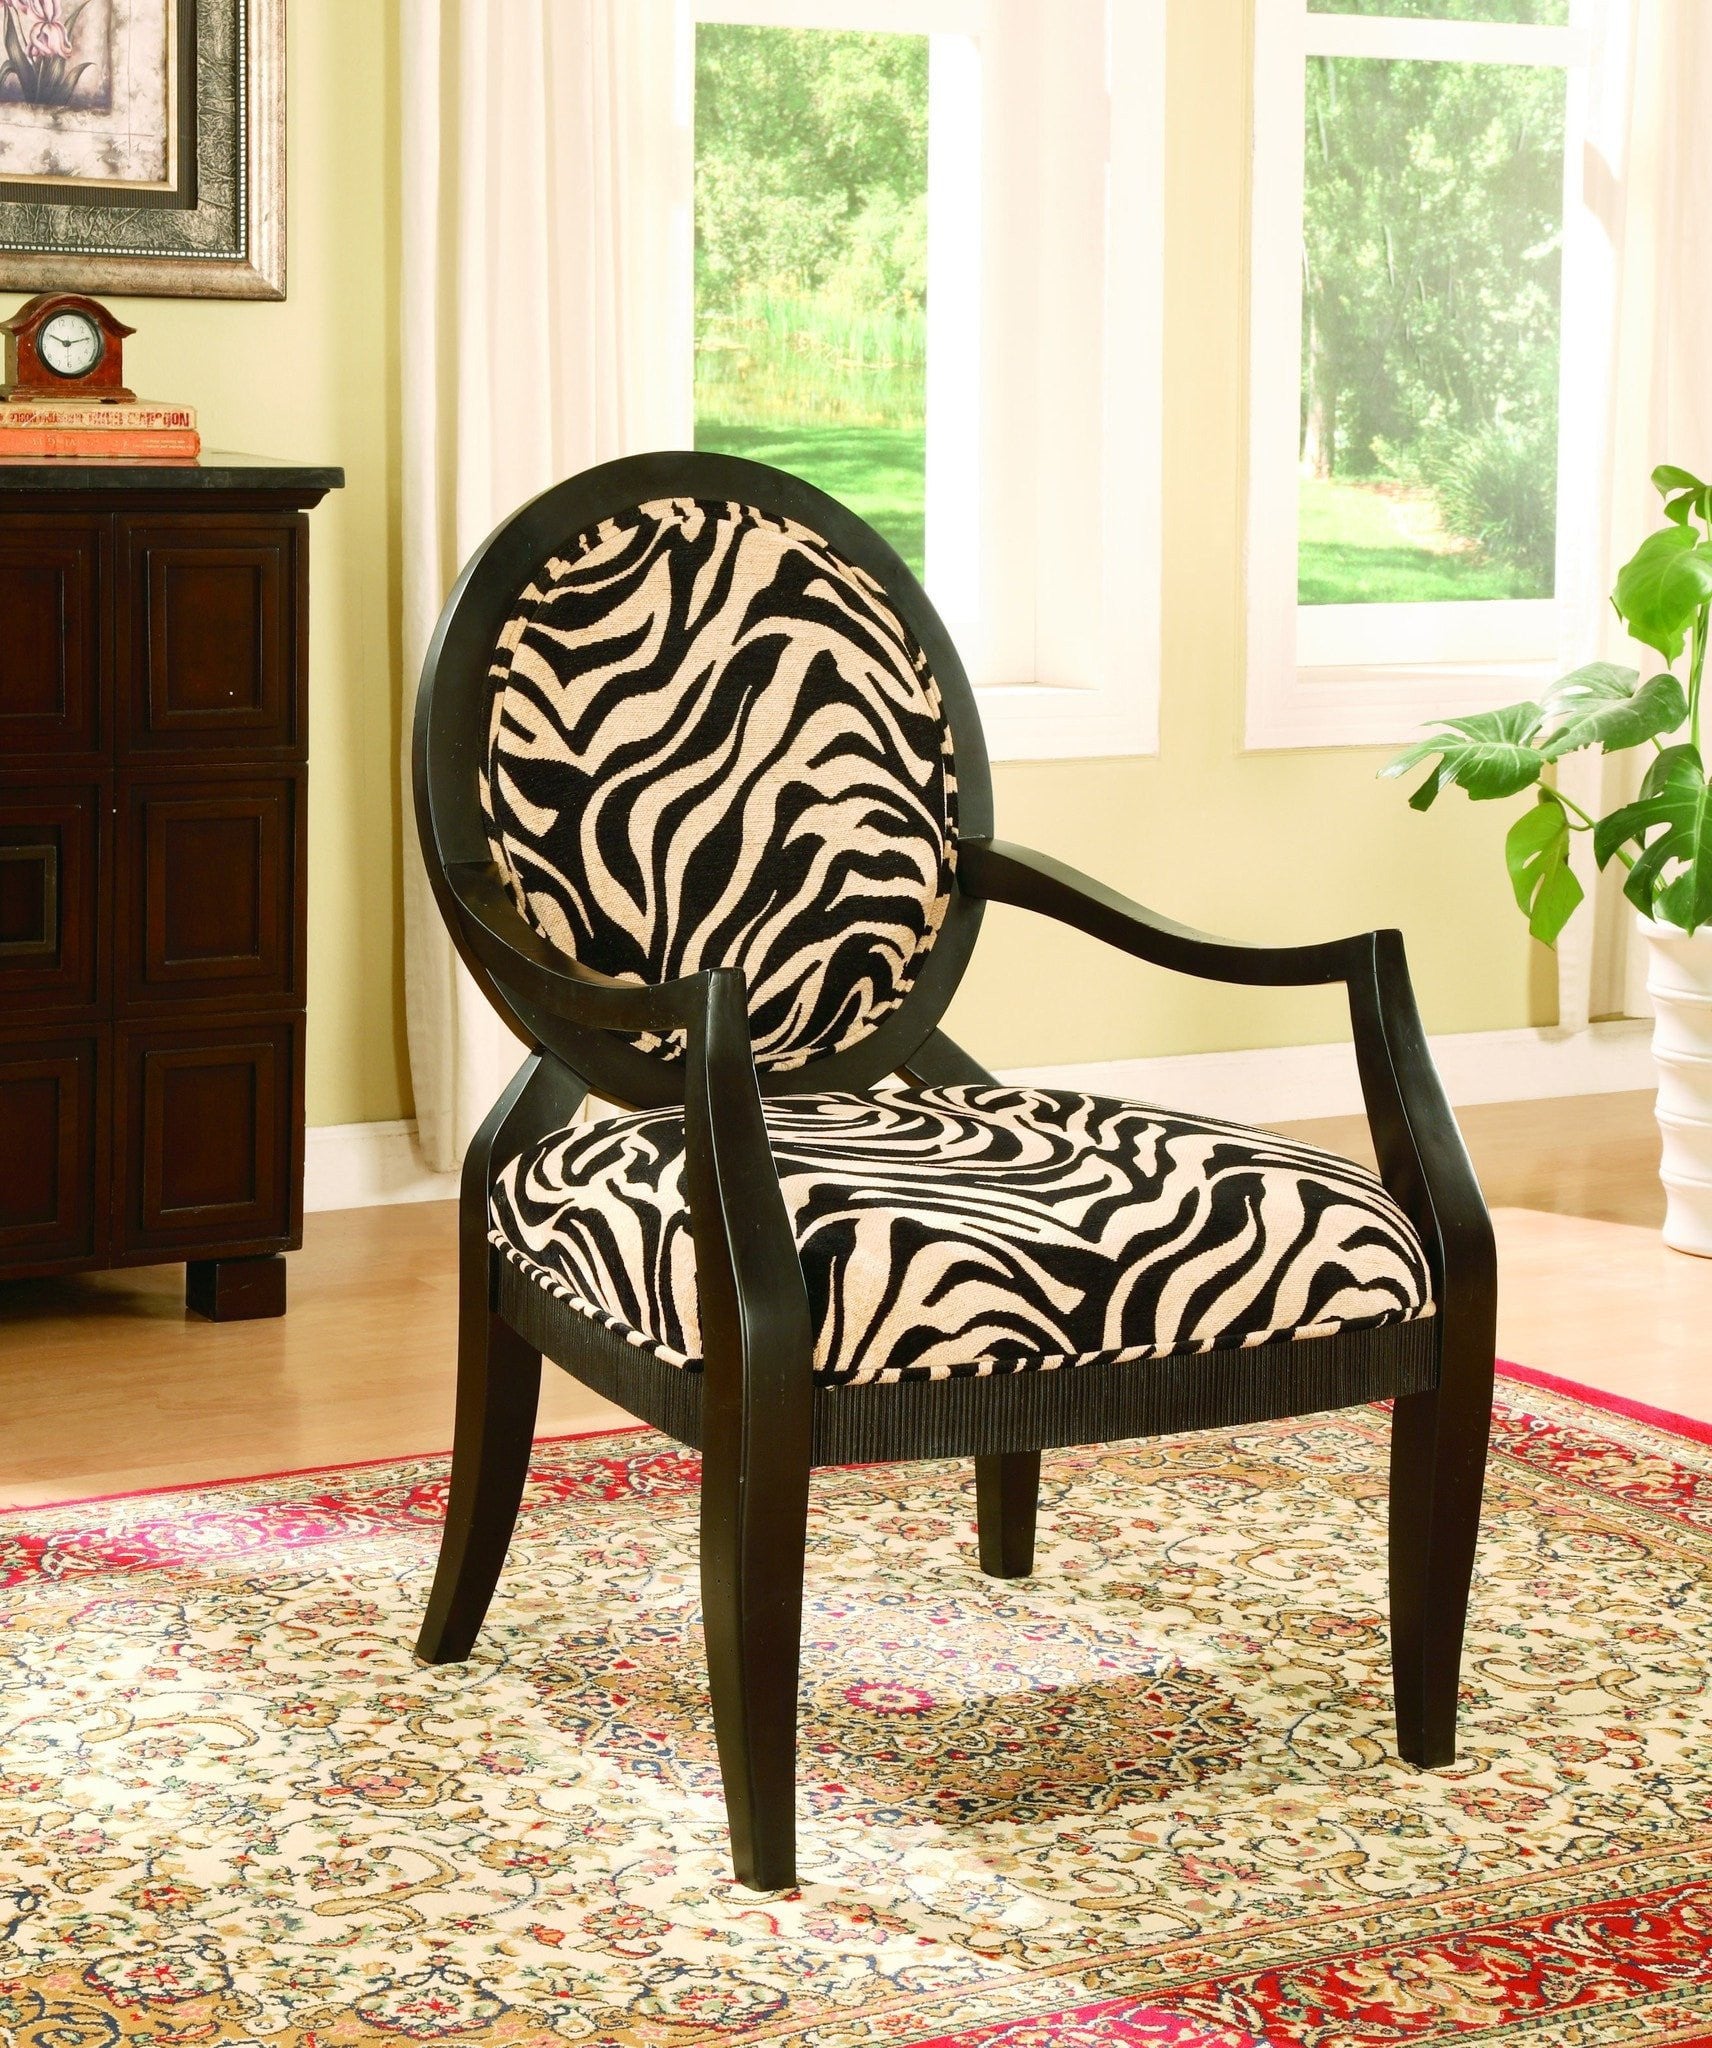 Zebra Print Accent Chair – Pacific Imports, Inc.